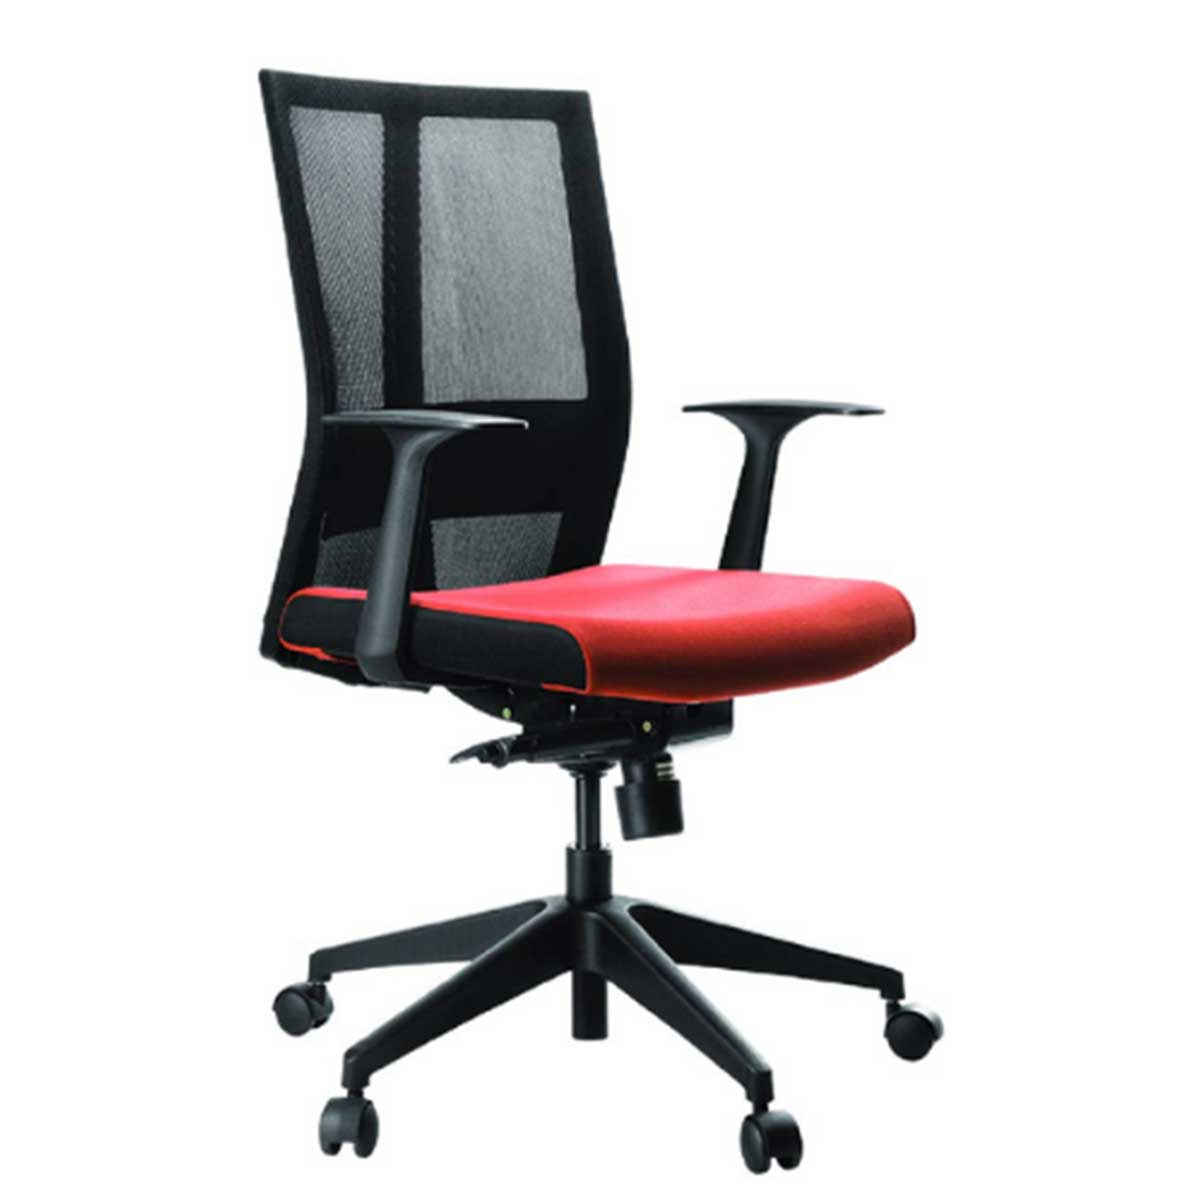 Conference Chair Manufacturers, Suppliers in Chhatarpur